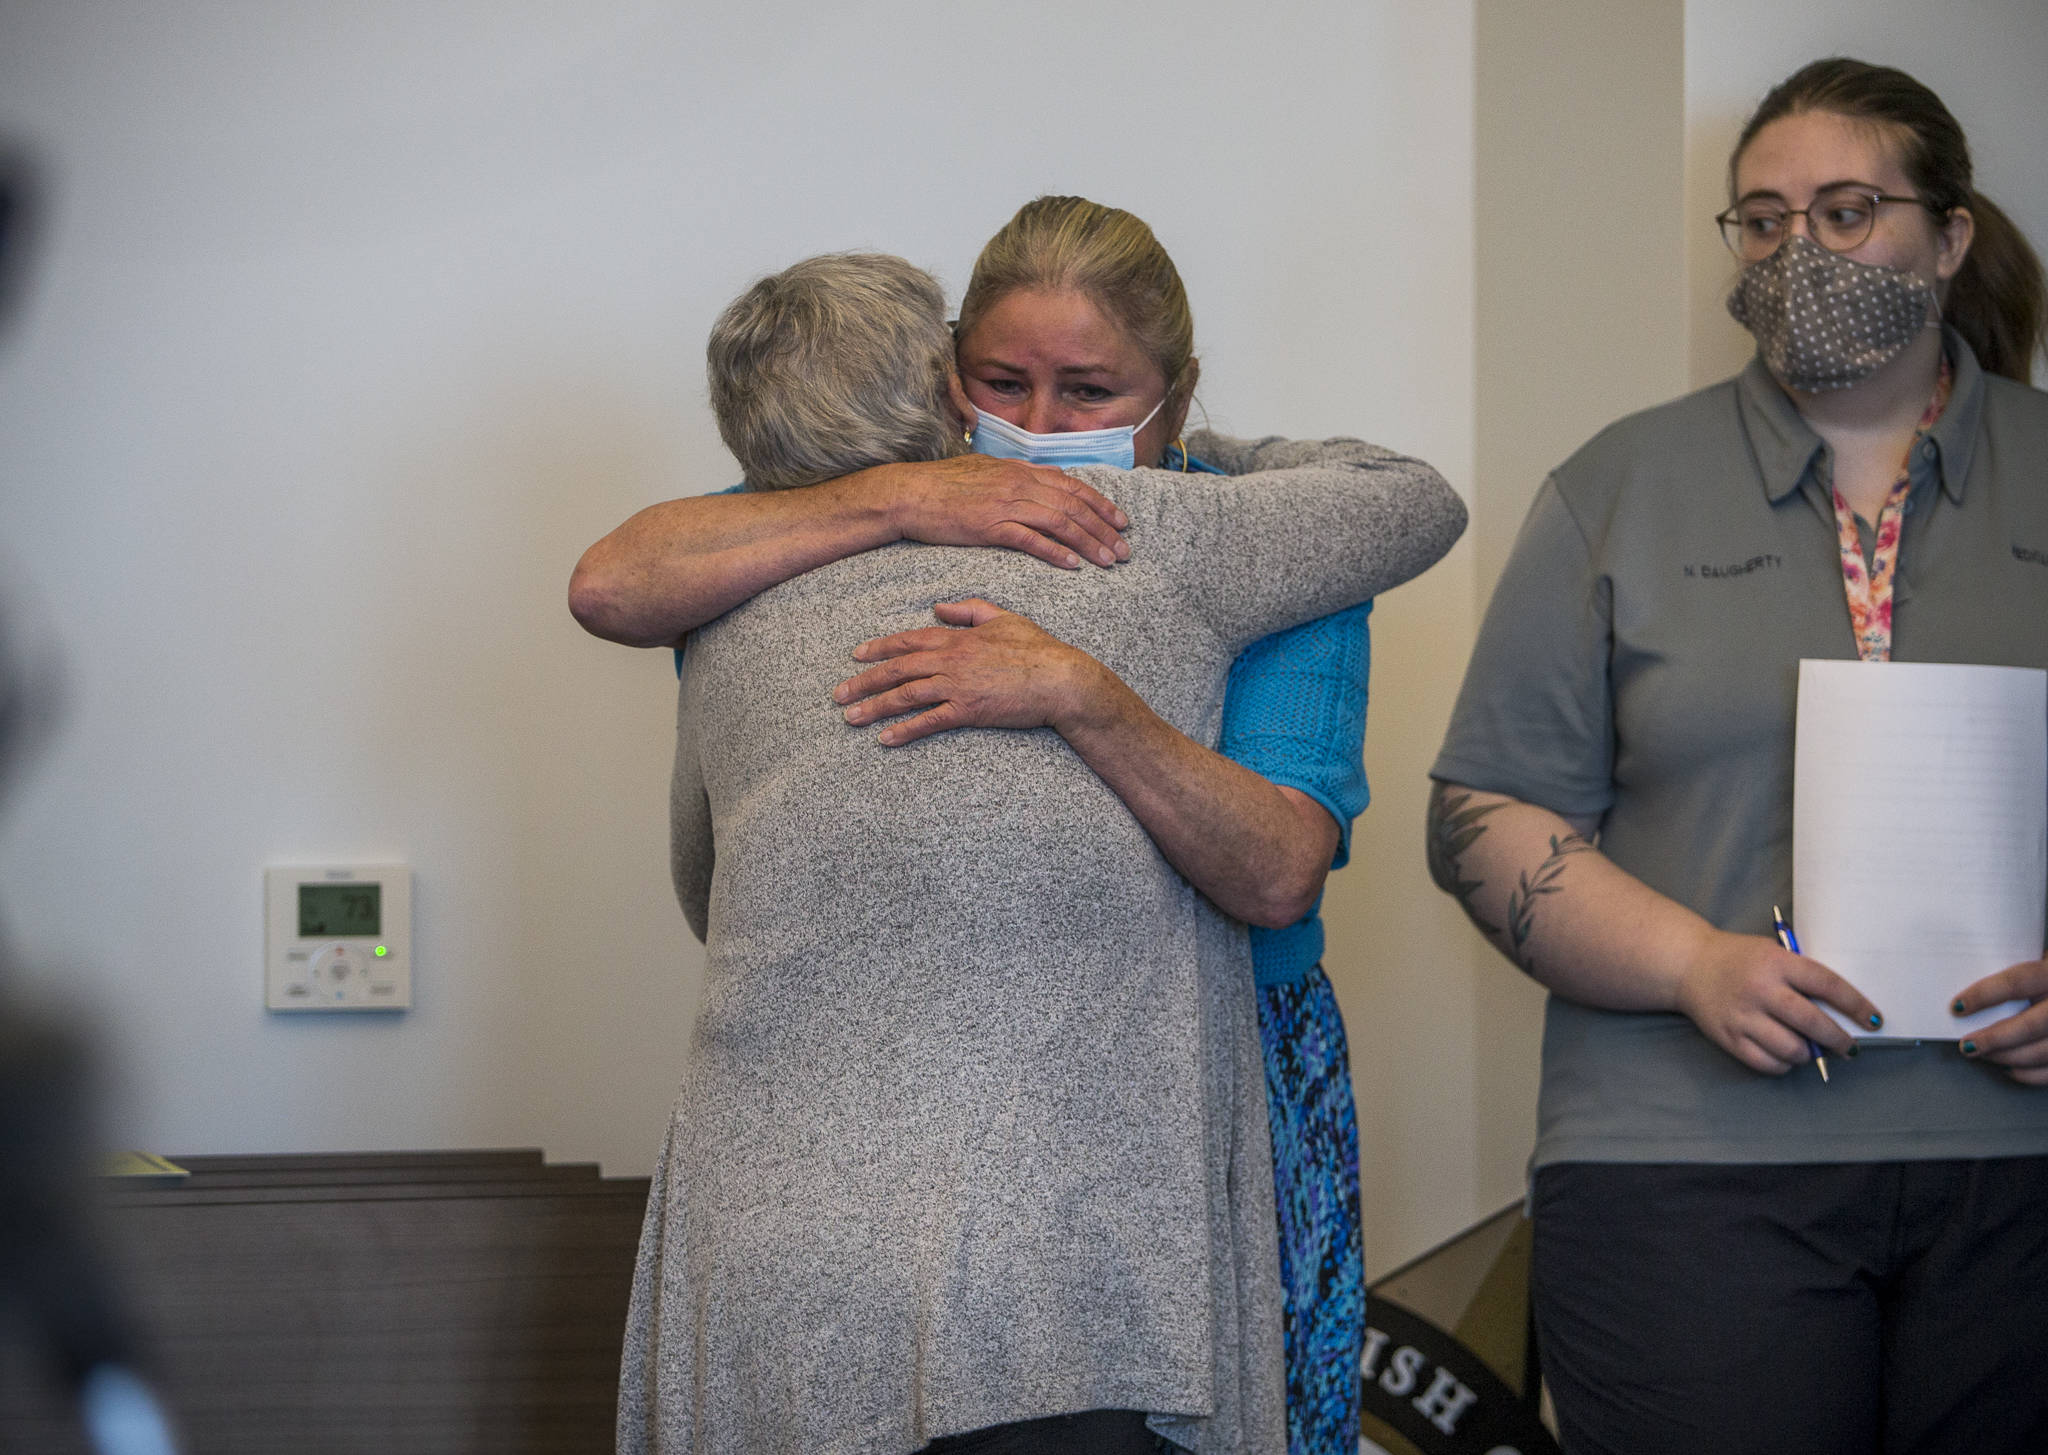 Eleanore “Ellie” Perry (right) hugs Marianne Lambert during a news conference on Wednesday in Everett. Perry is the cousin of Rodney Peter Johnson and Lambert is his sister. (Olivia Vanni / The Herald)